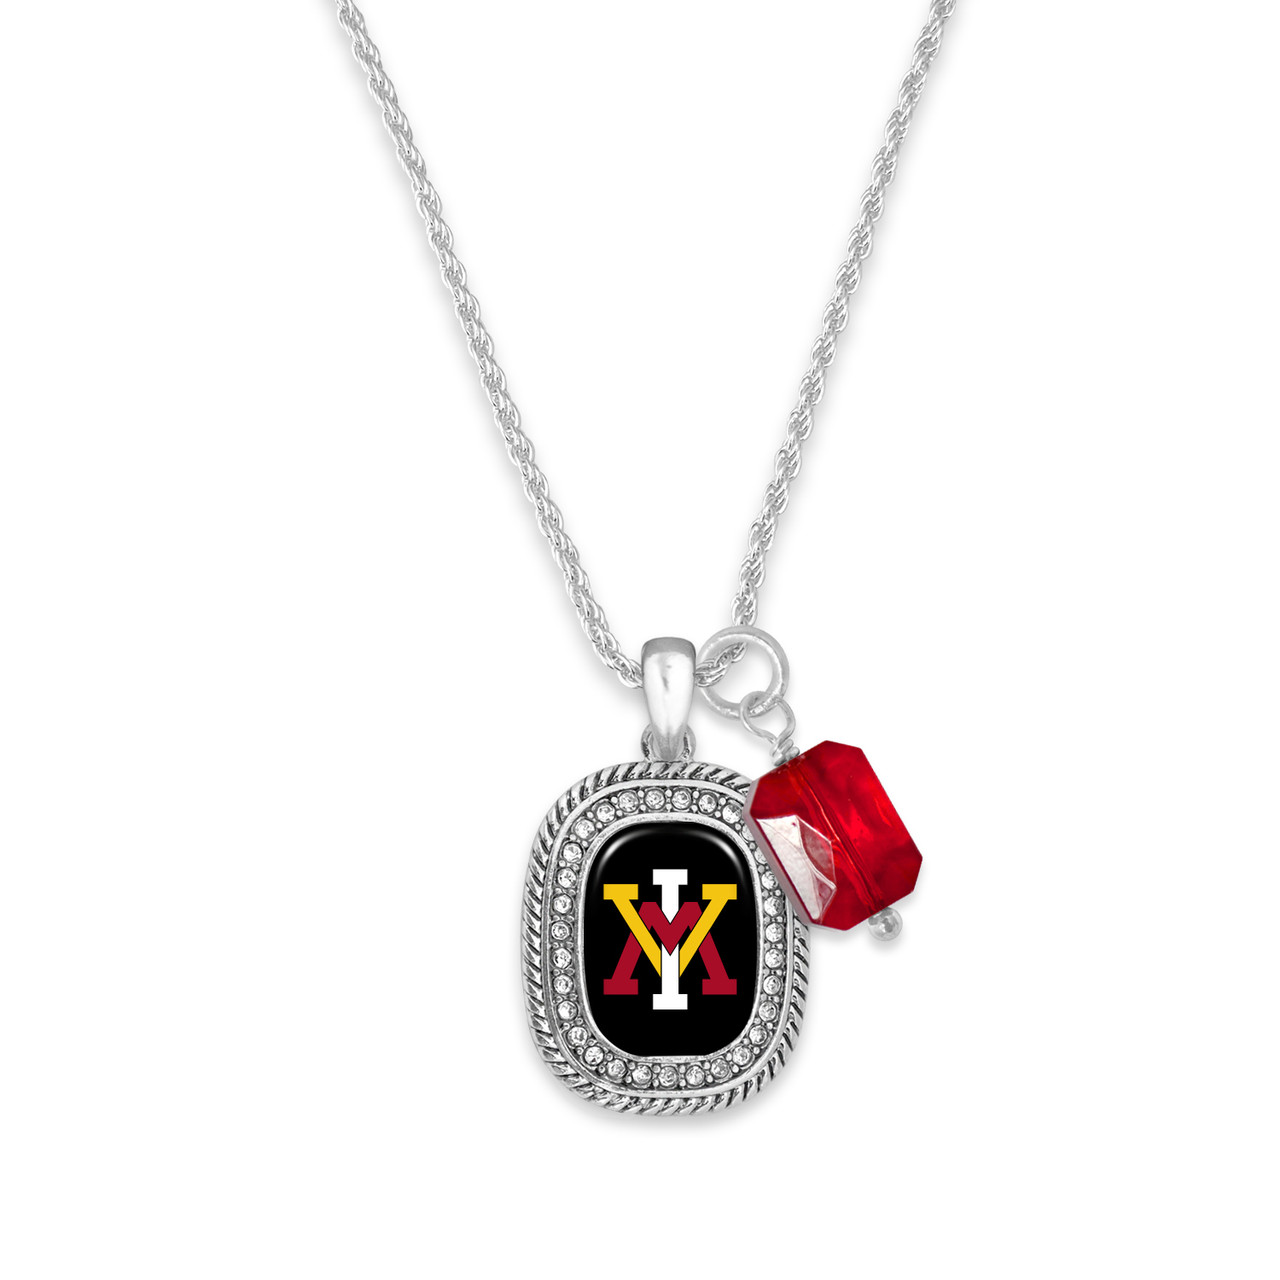 Virginia Military Keydets Necklace - Madison